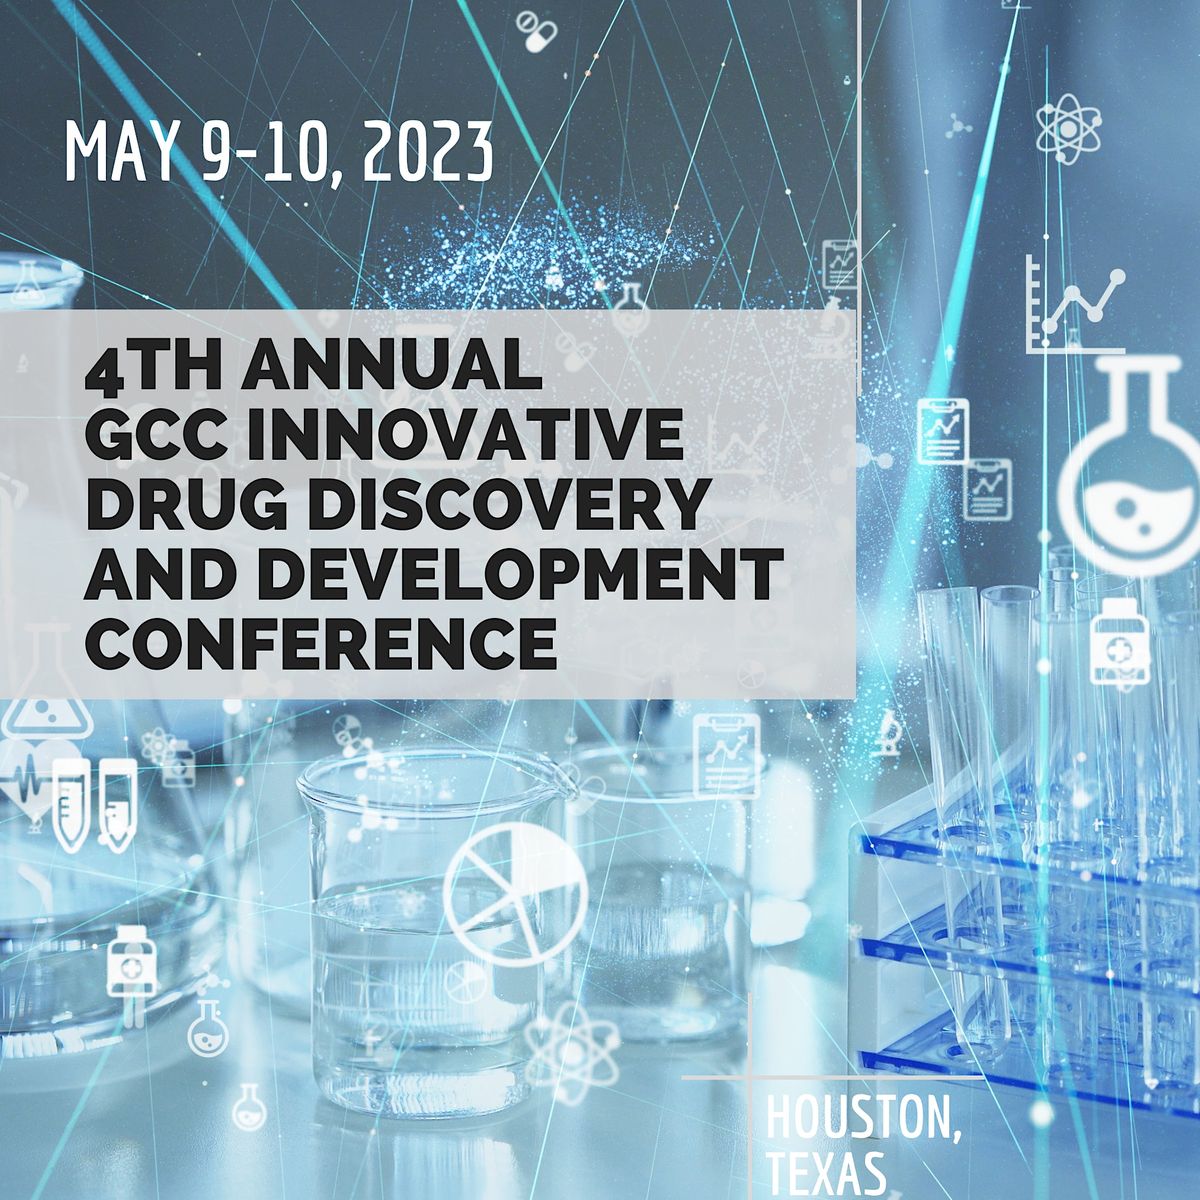 4th Annual GCC Innovative Drug Discovery and Development Conference